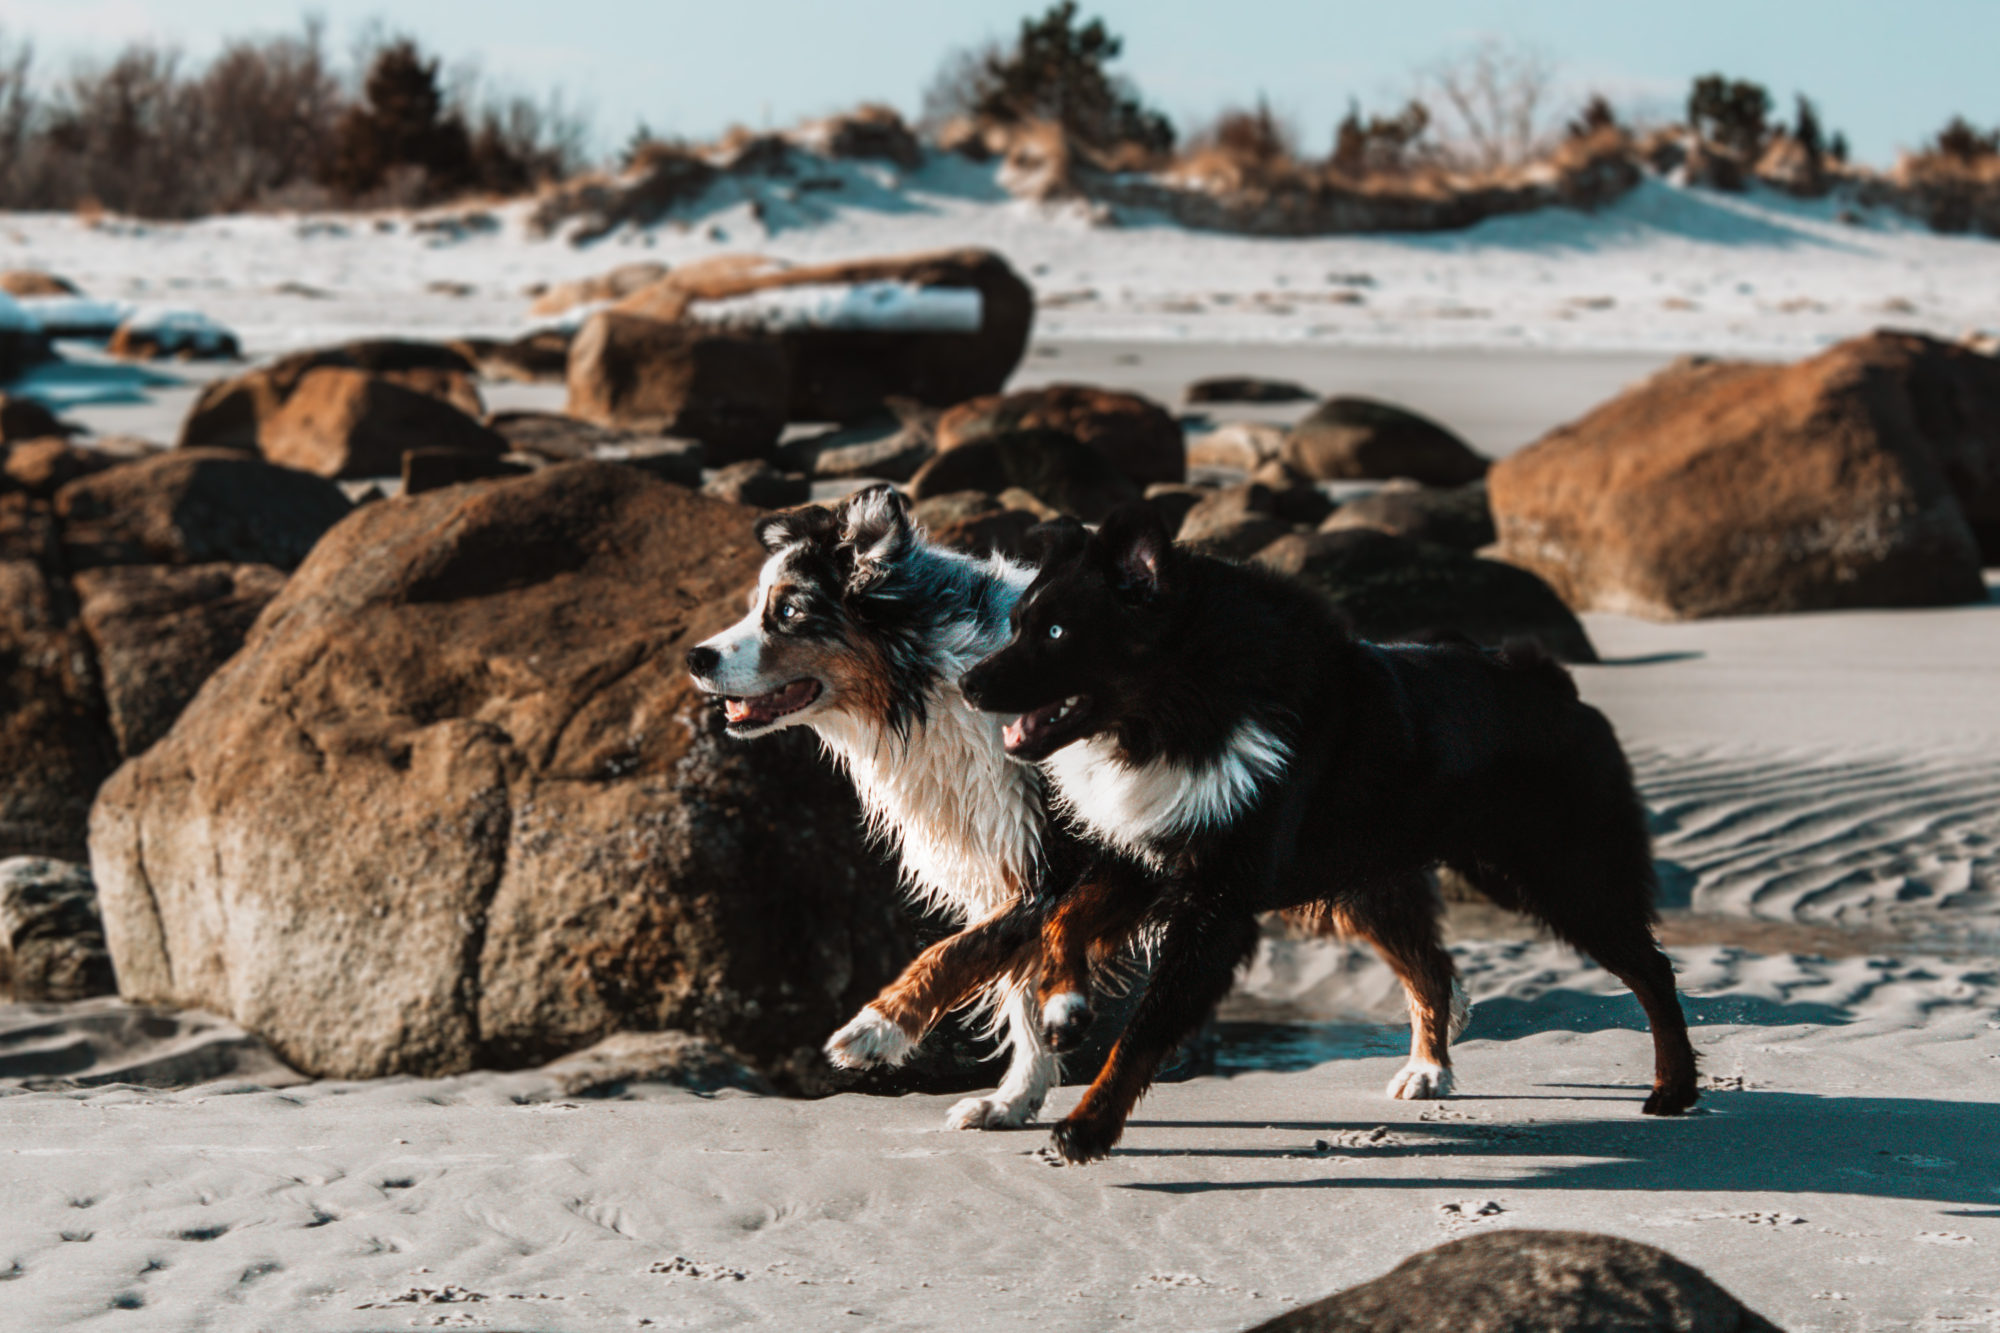 How To Level Up Your Pet Photos | Pet Photography Tips by popular New England photographer, Shannon Shipman: image of two dogs running on a New England beach. 